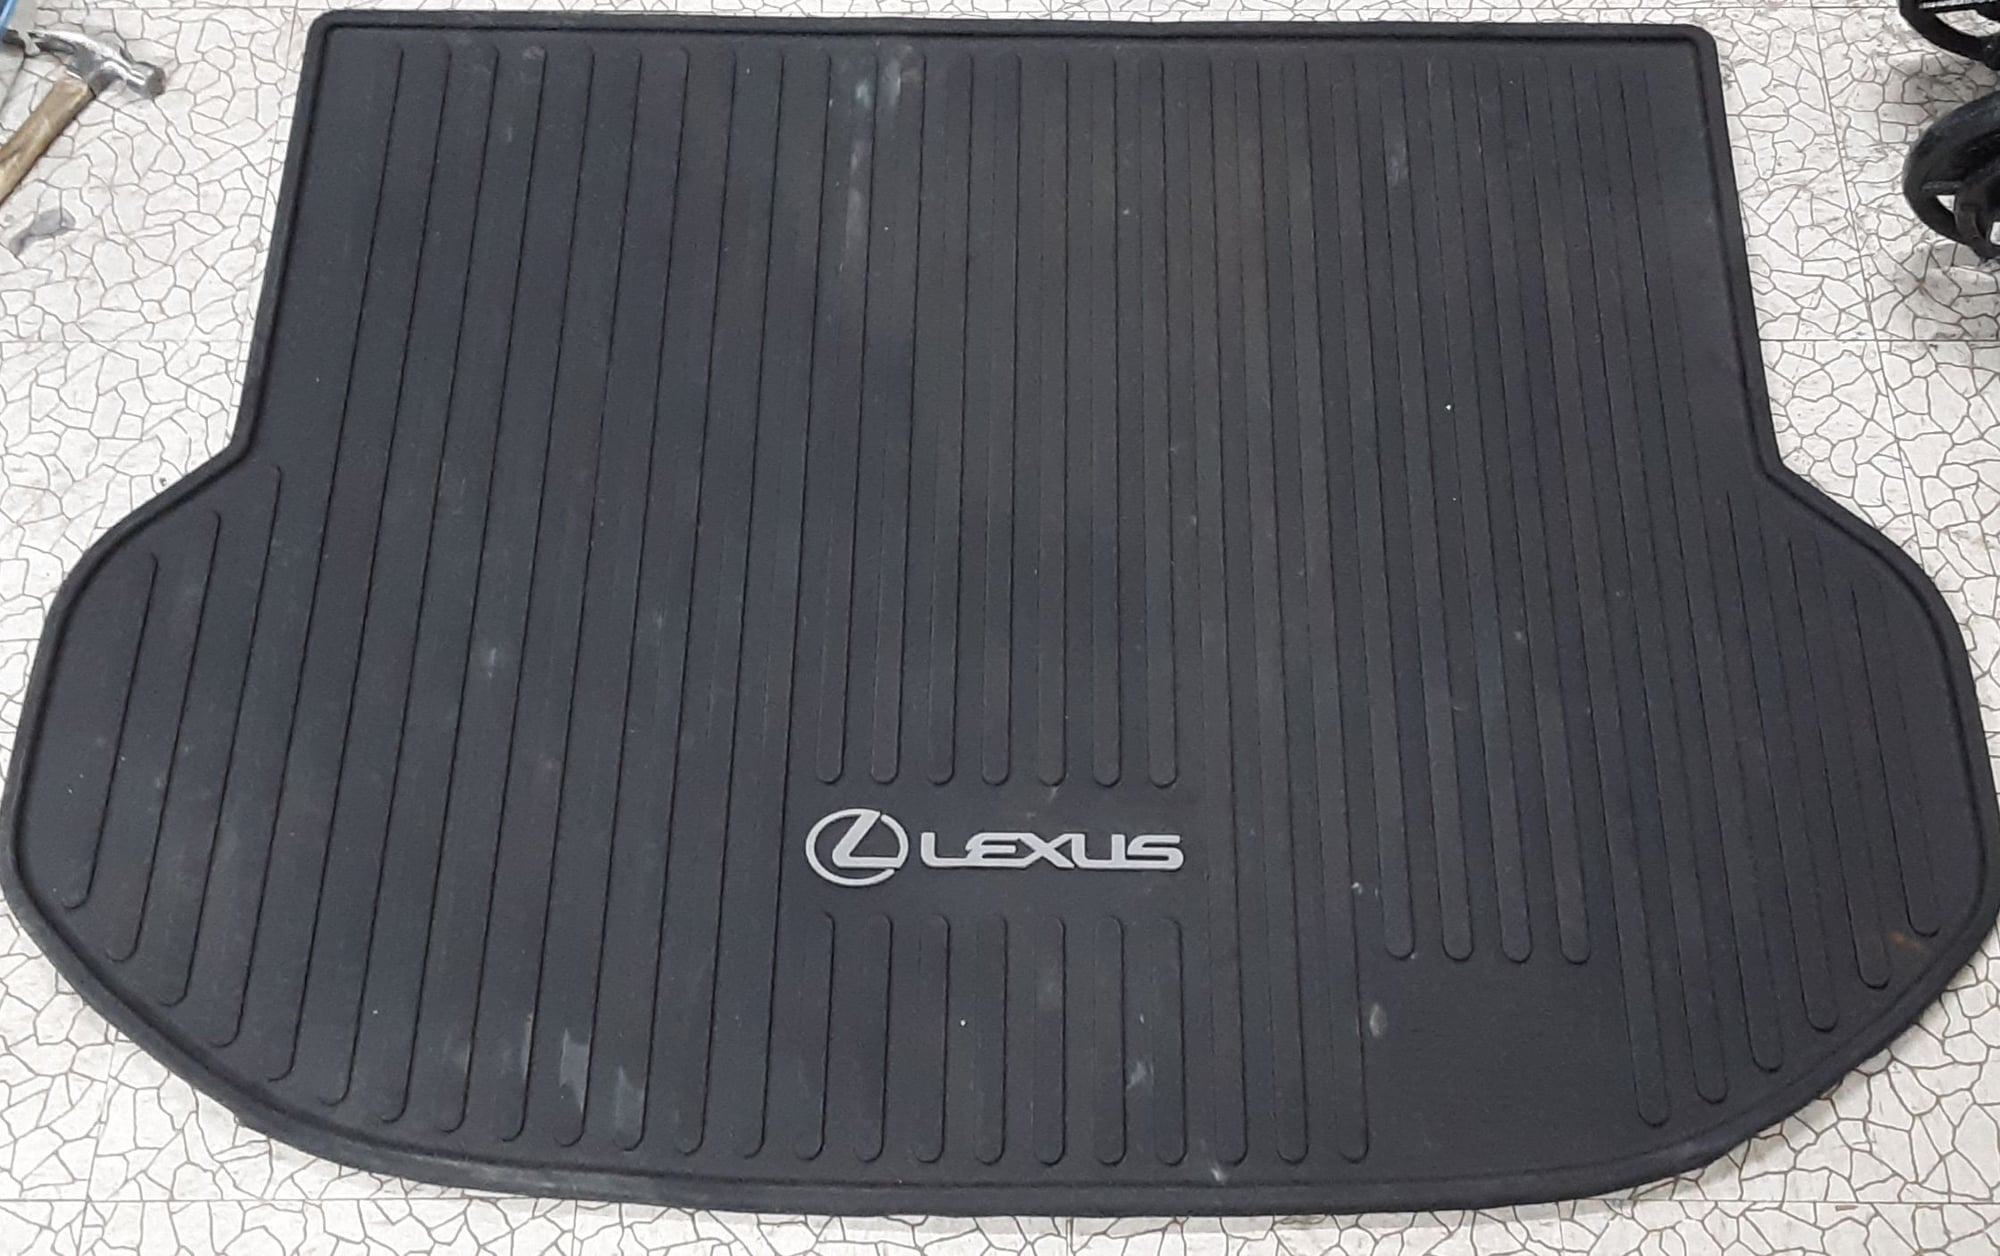 Accessories - 2017 NX Rear Cargo Area Rubber Cargo Mat - Used - 2015 to 2018 Lexus NX200t - Pm Me, MI 48234, United States